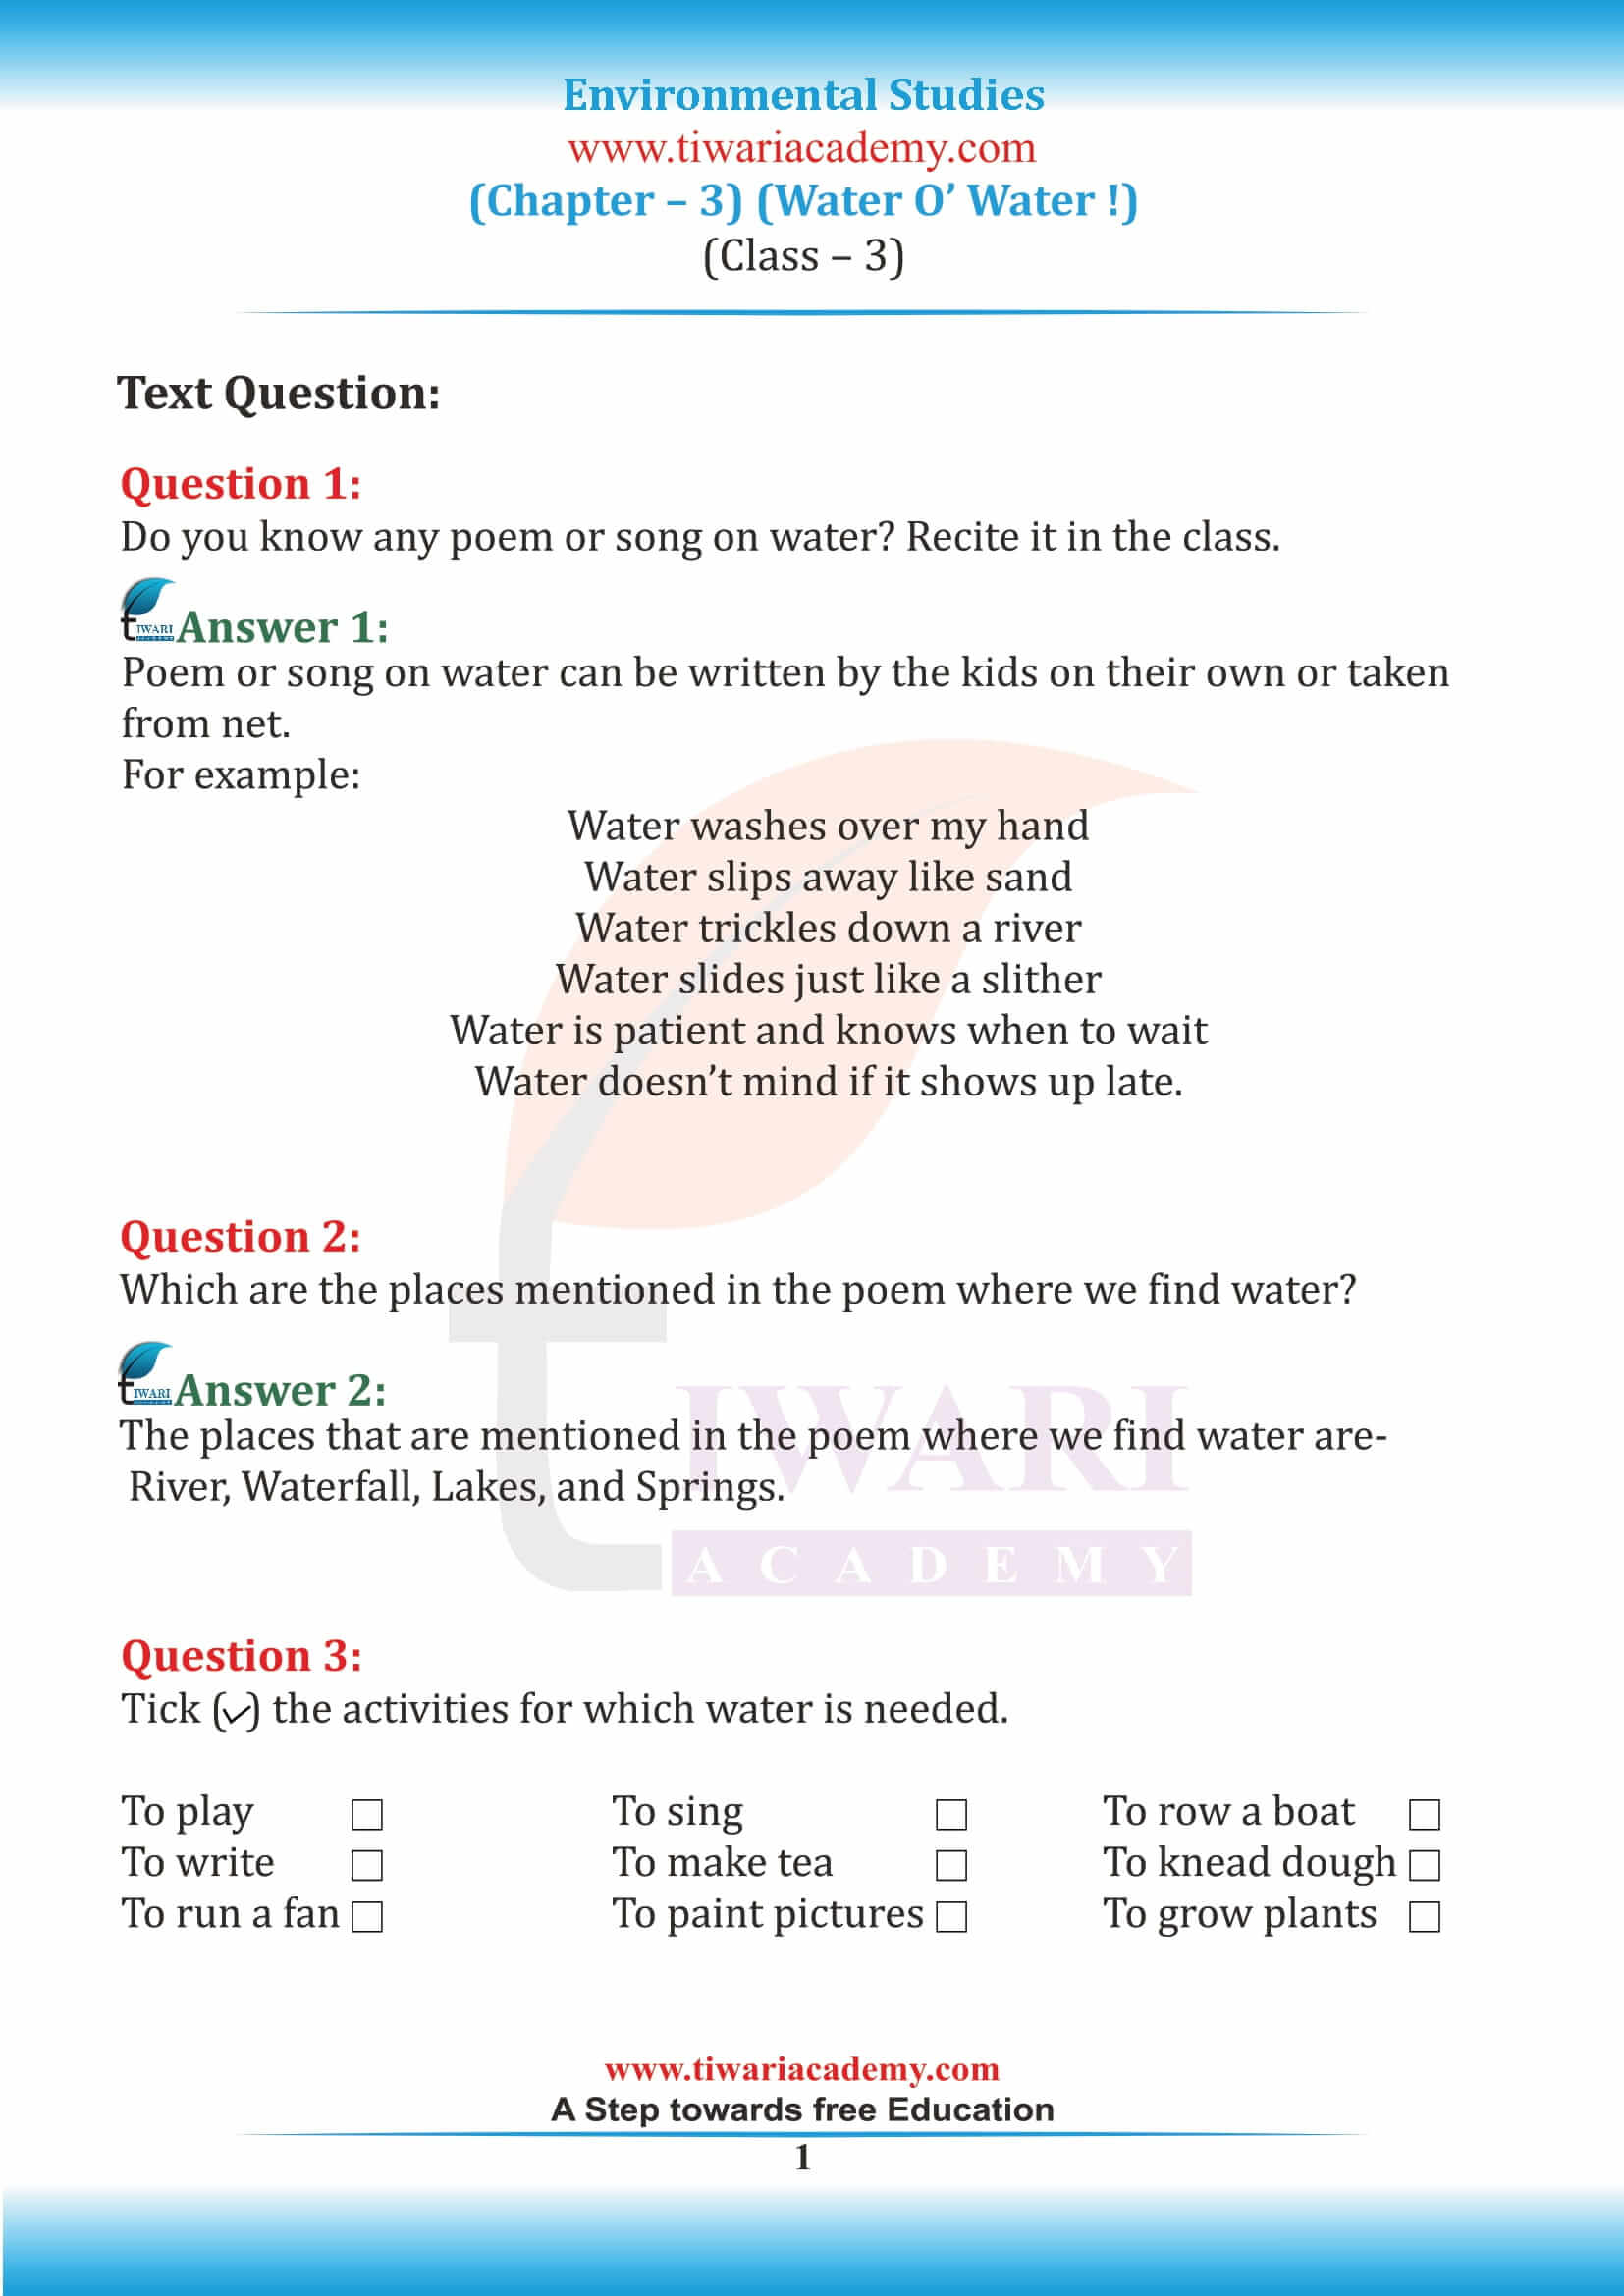 NCERT Solutions for Class 3 EVS Chapter 3 Water O Water